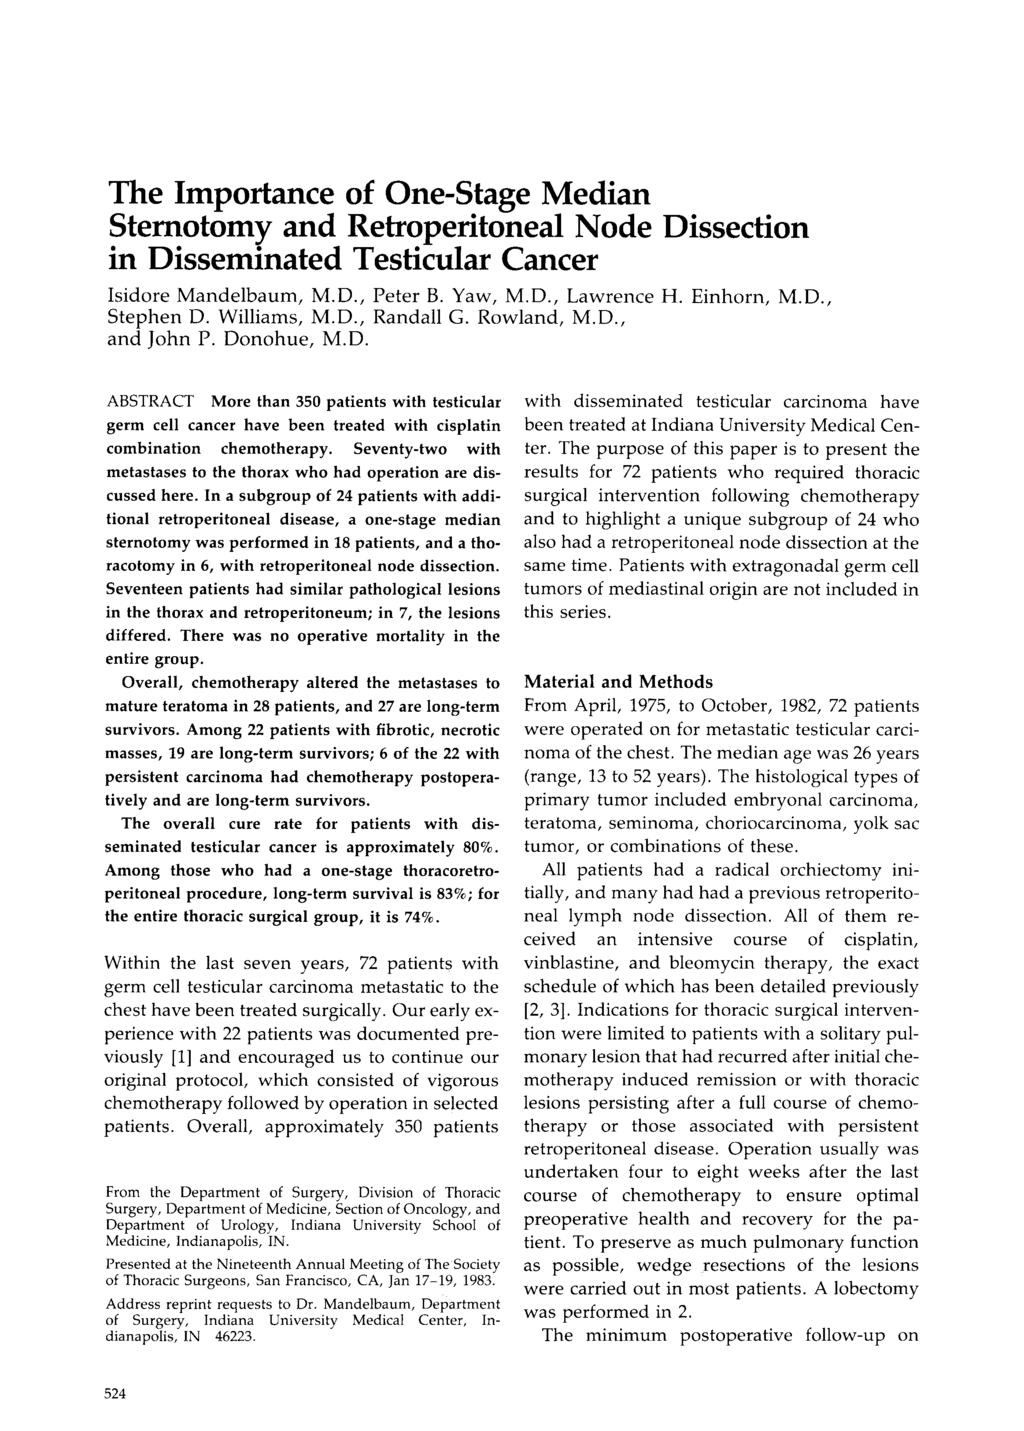 The Importance of One-Stage Median Stemotomy and Retroperitoneal Node Dissection in Disseminated Testicular Cancer Isidore Mandelbaum, M.D., Peter B. Yaw, M.D., Lawrence H. Einhorn, M.D., Stephen D.